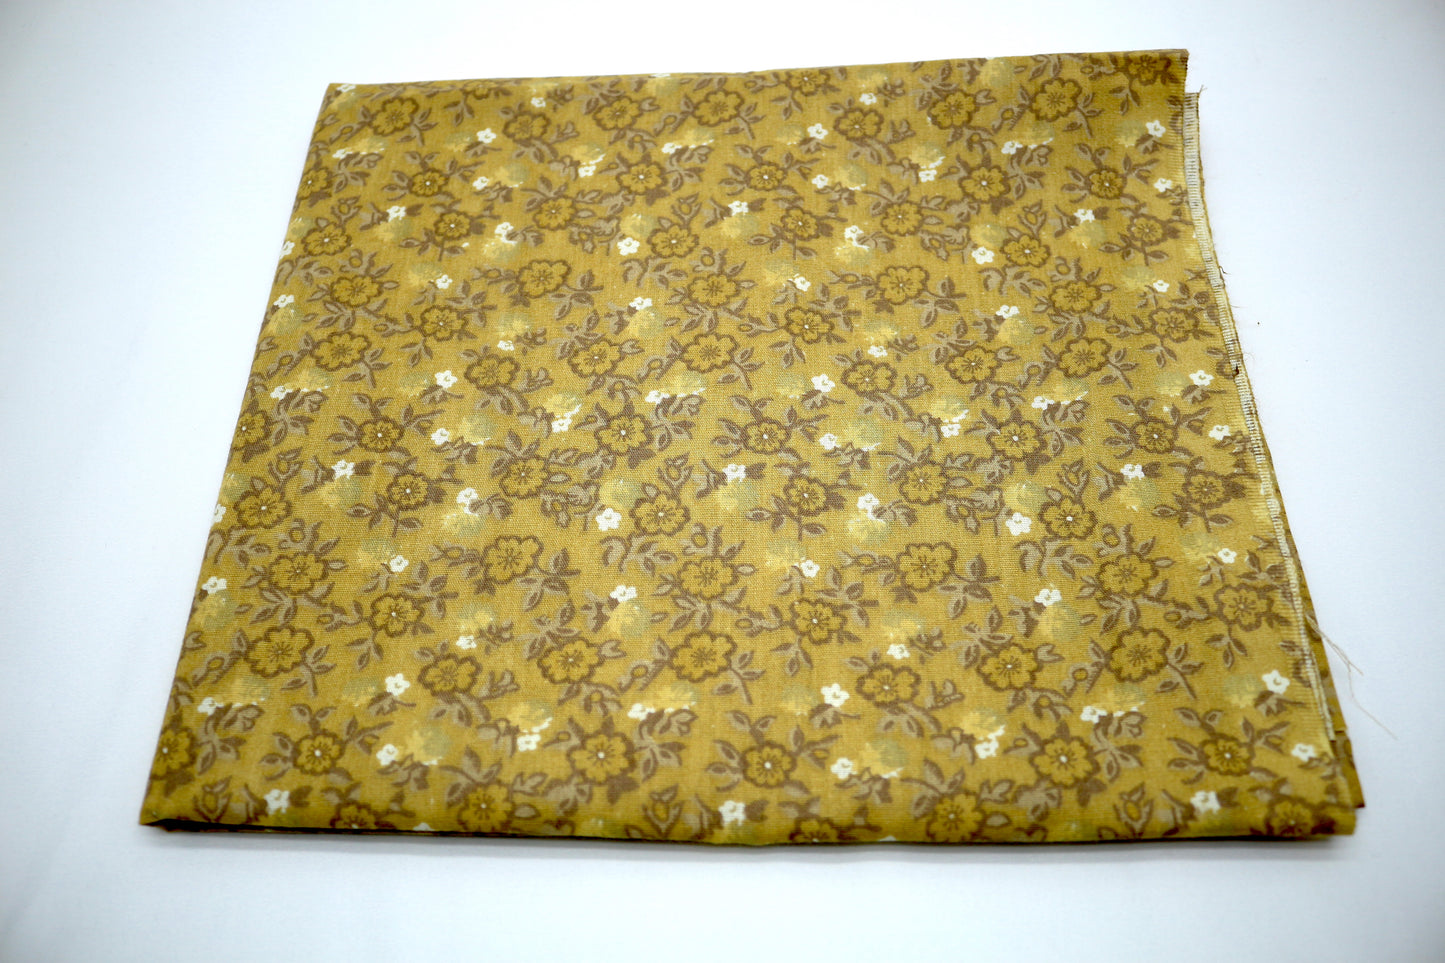 Vintage Flower Couch Cotton Fabric 43" x 1 yd